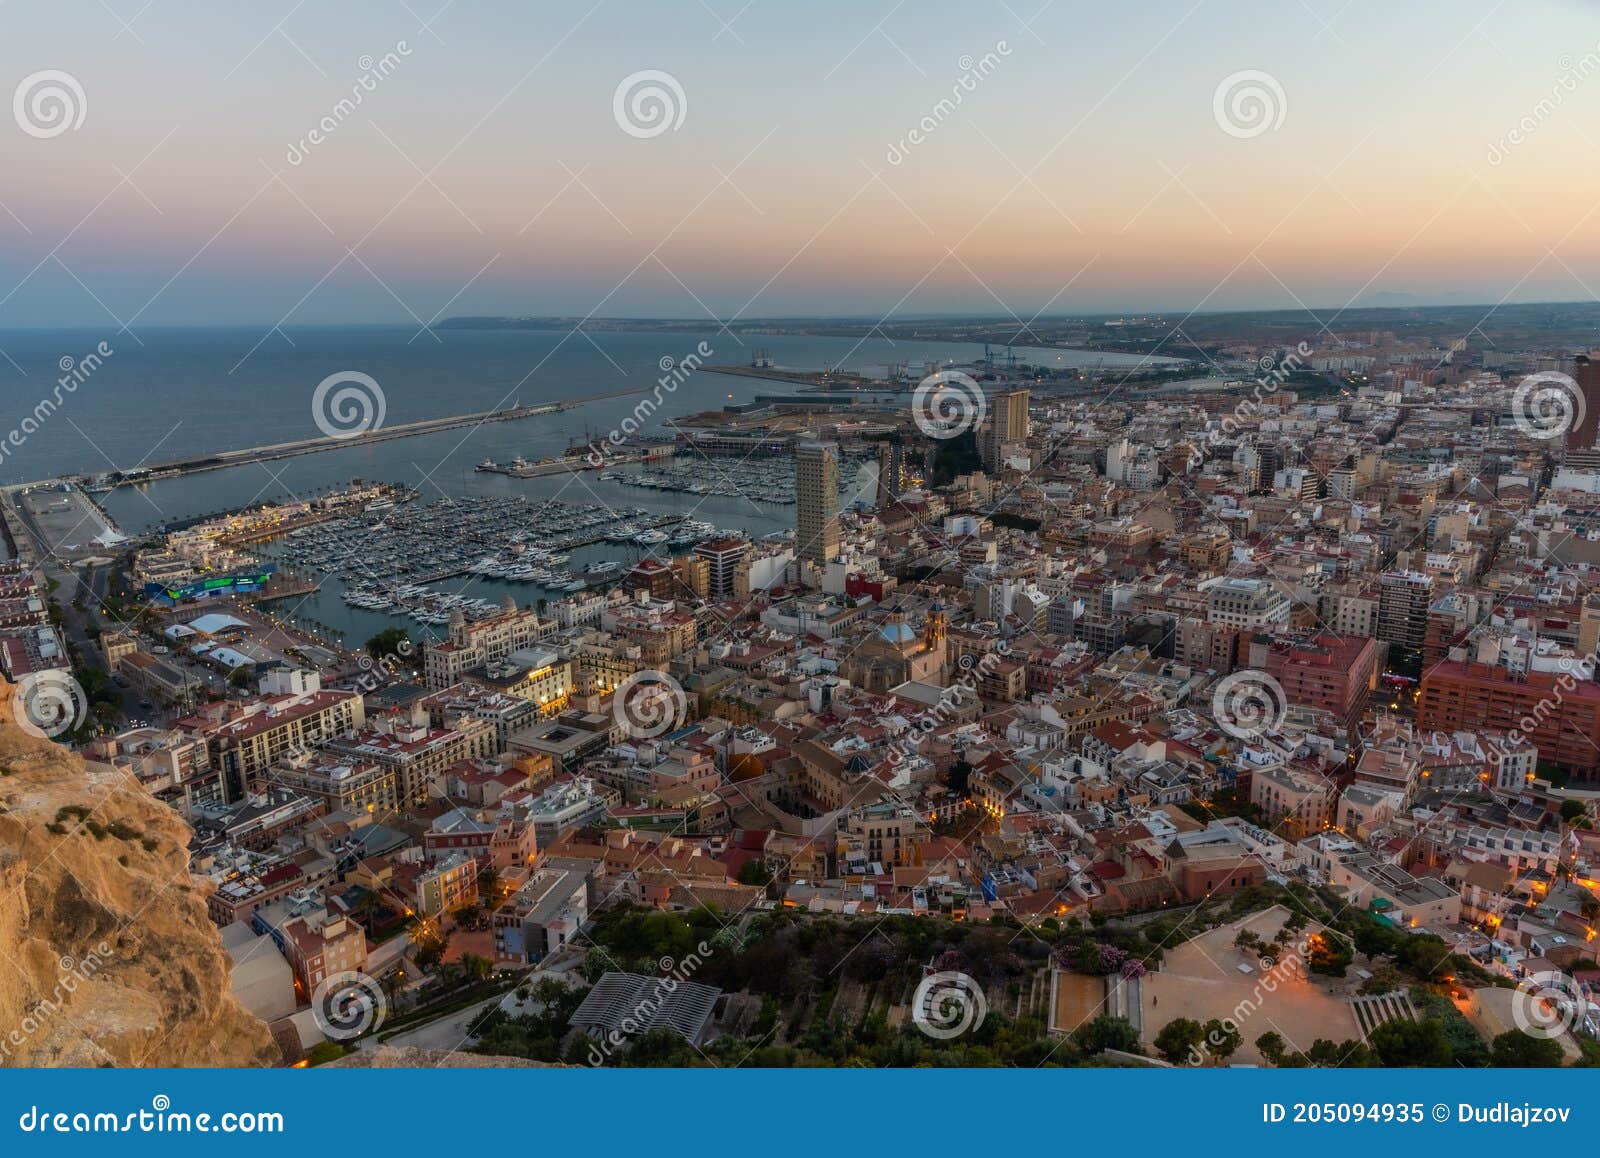 Sunset View of Spanish City and Port Alicante Stock Image - Image of ...